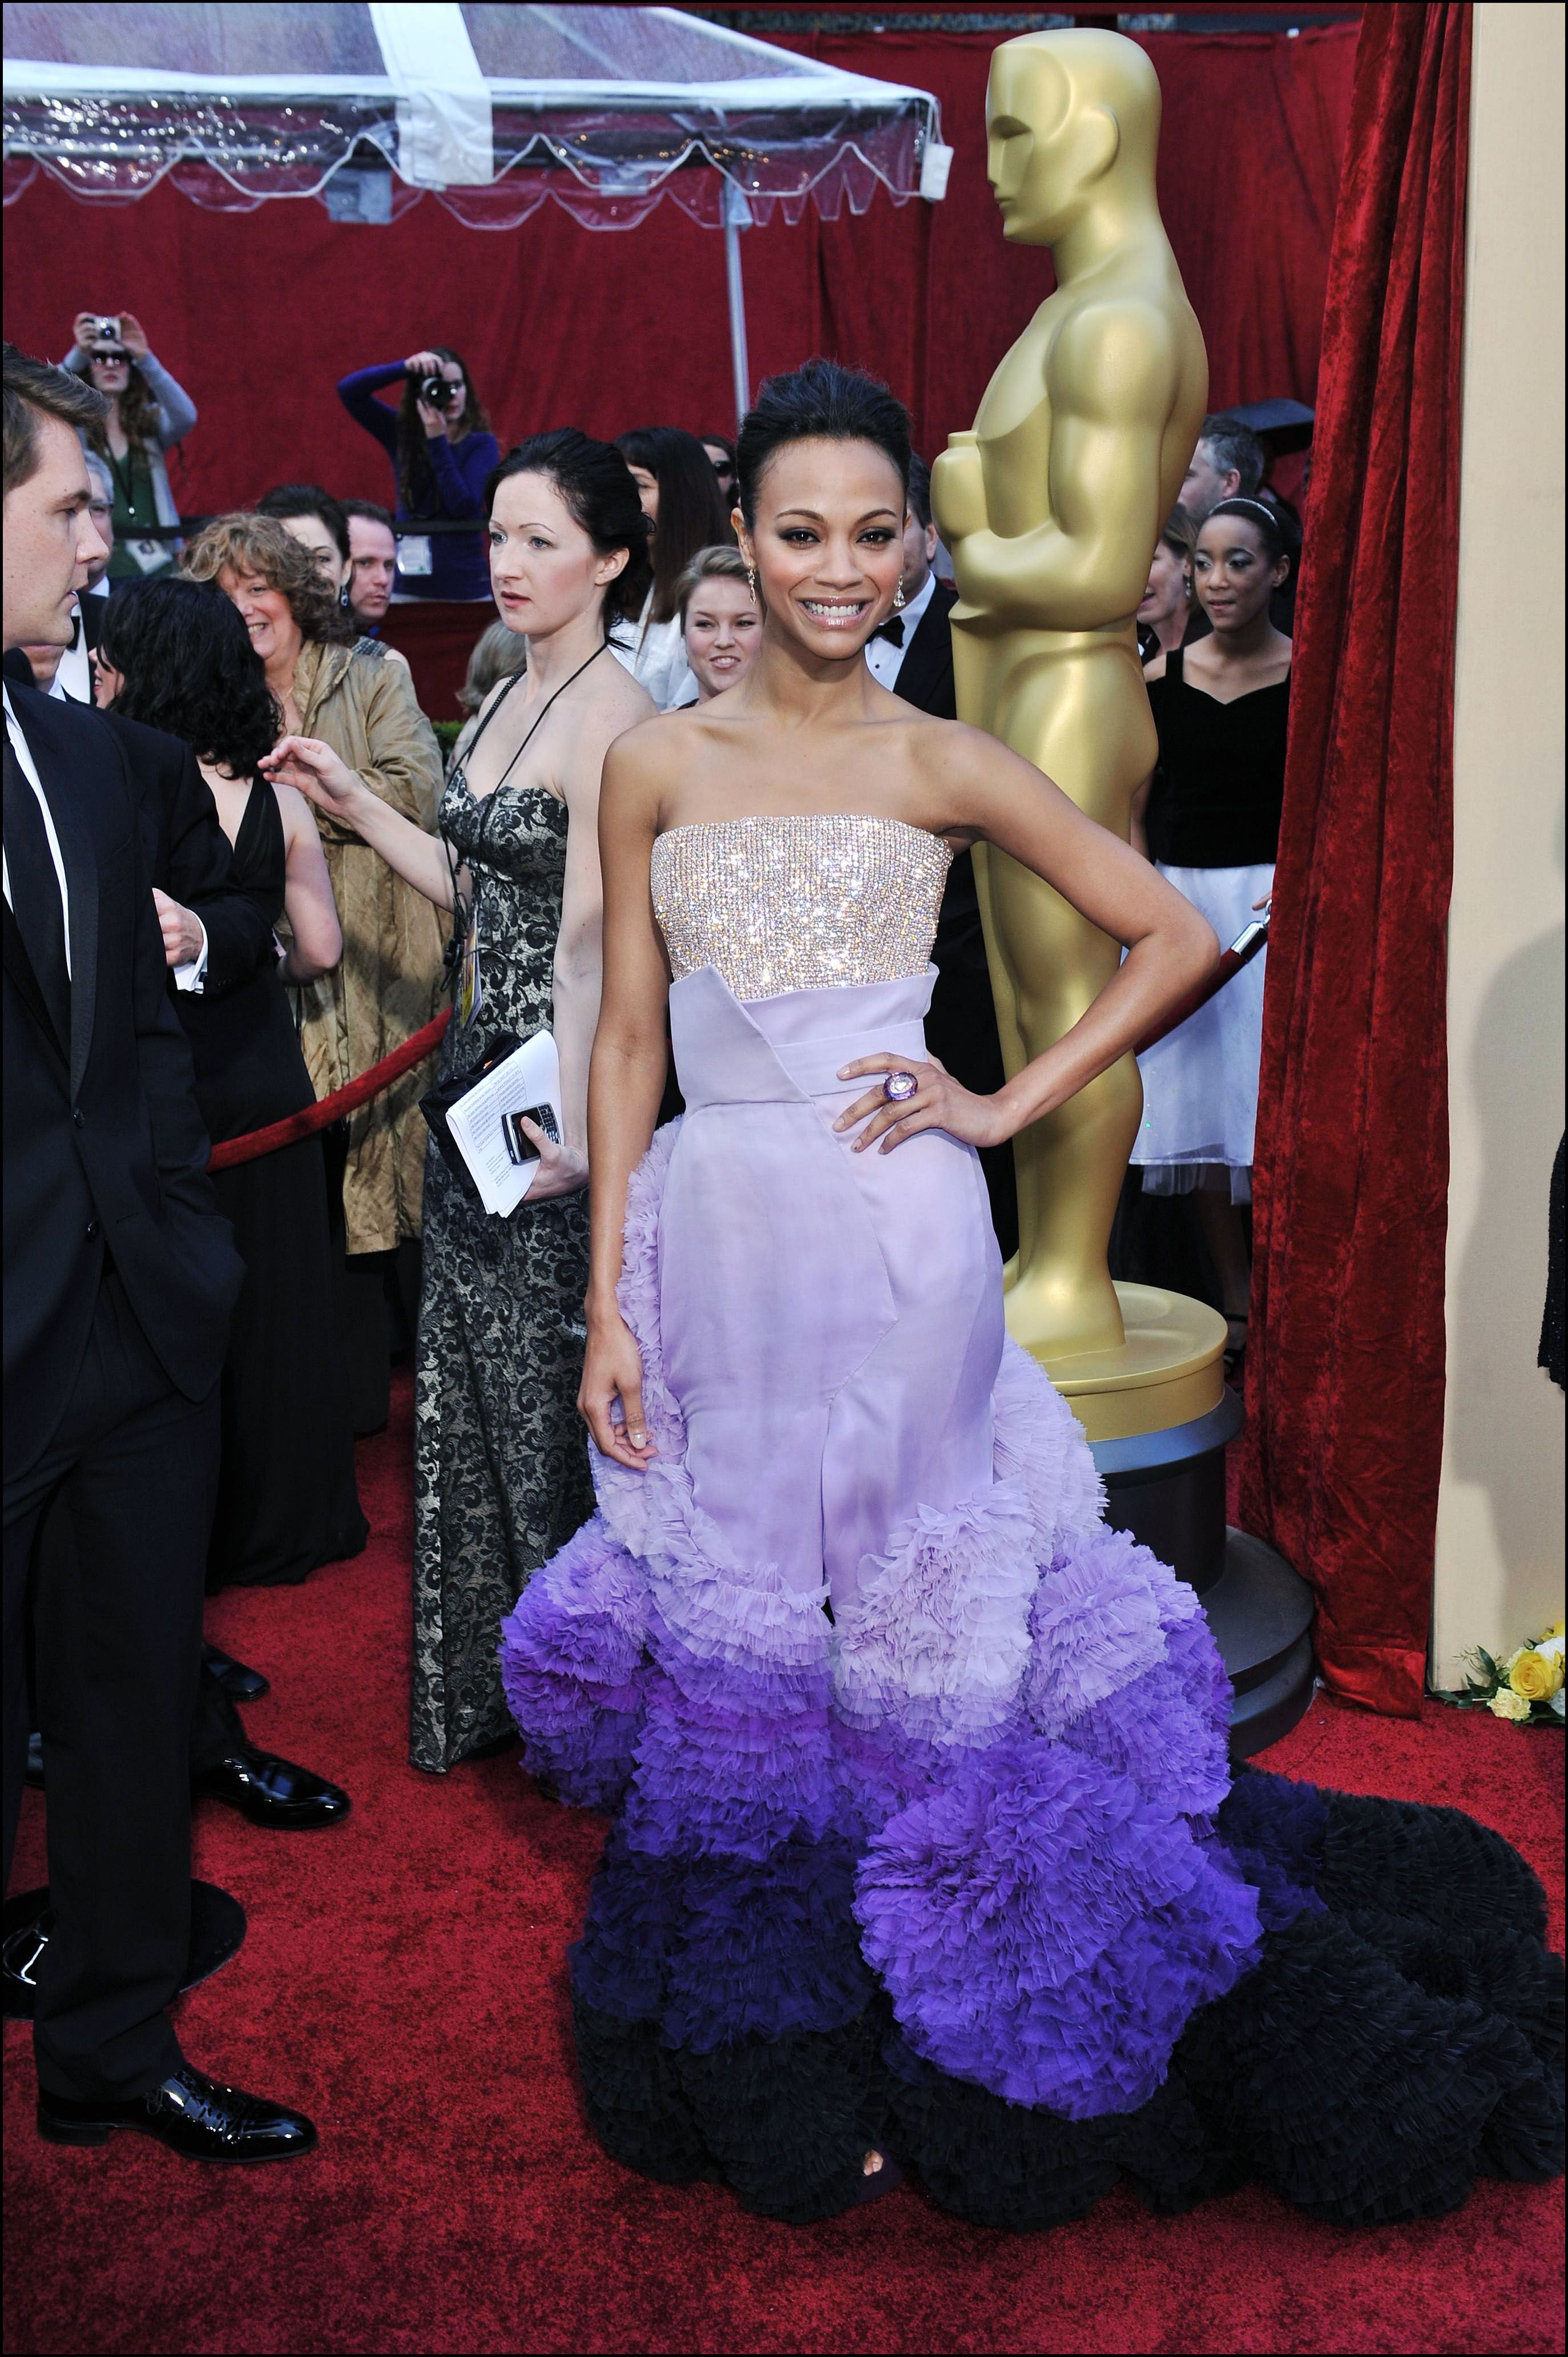 Zoe Saldana attends the 2010 Academy Awards in a purple Givency gown | Source: Getty Images/GlobalImagesUkraine